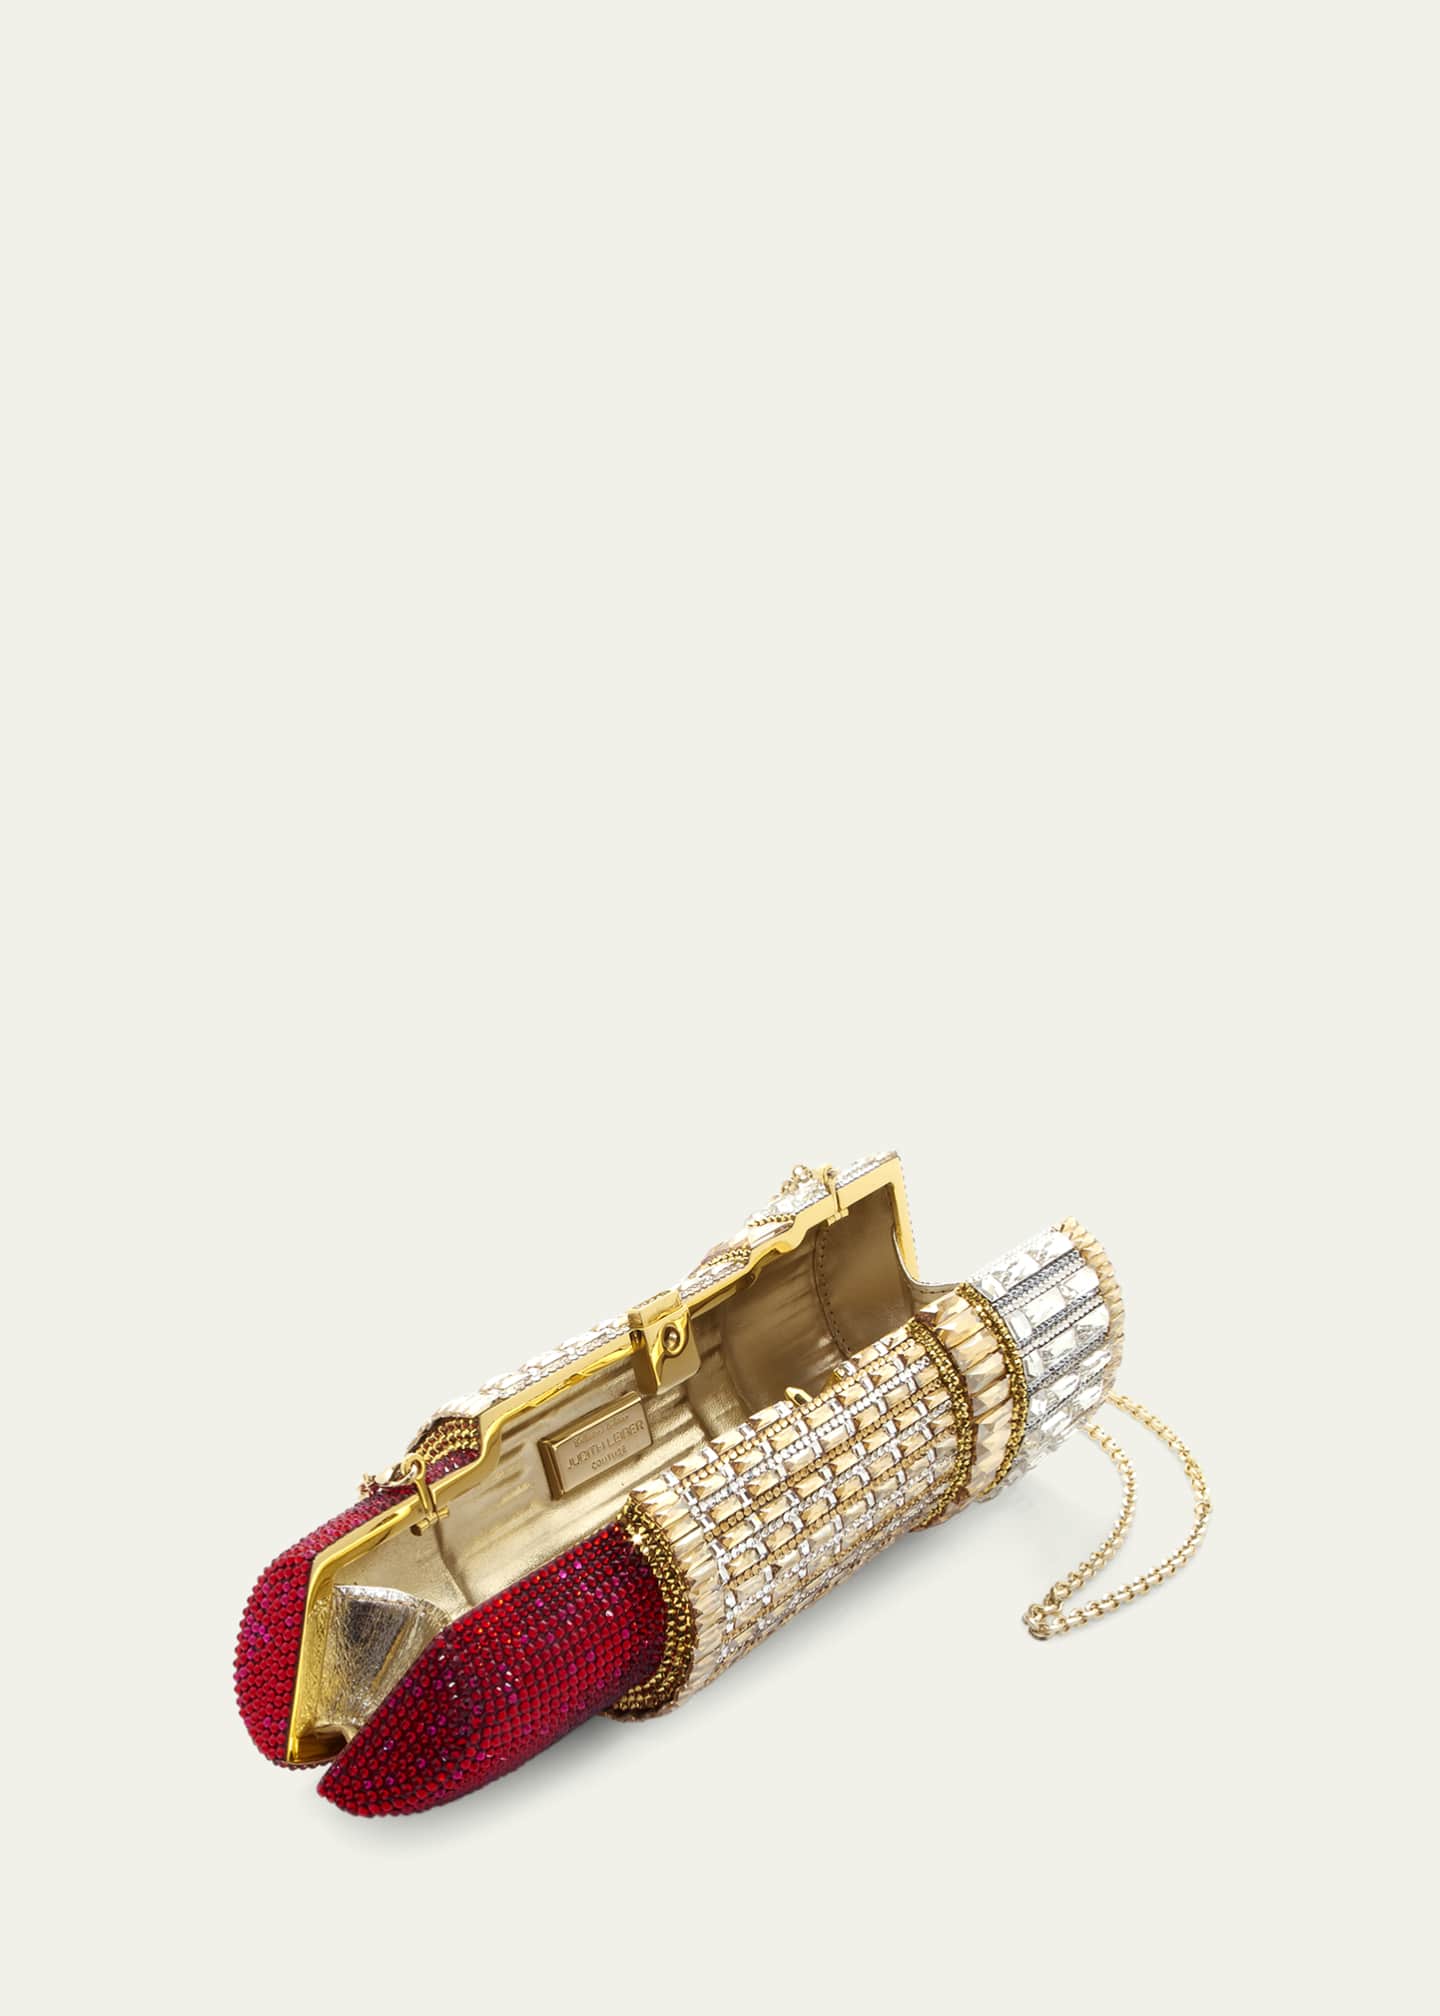 Lipstick & Louboutins  Bags, Luxury bags, Bag accessories